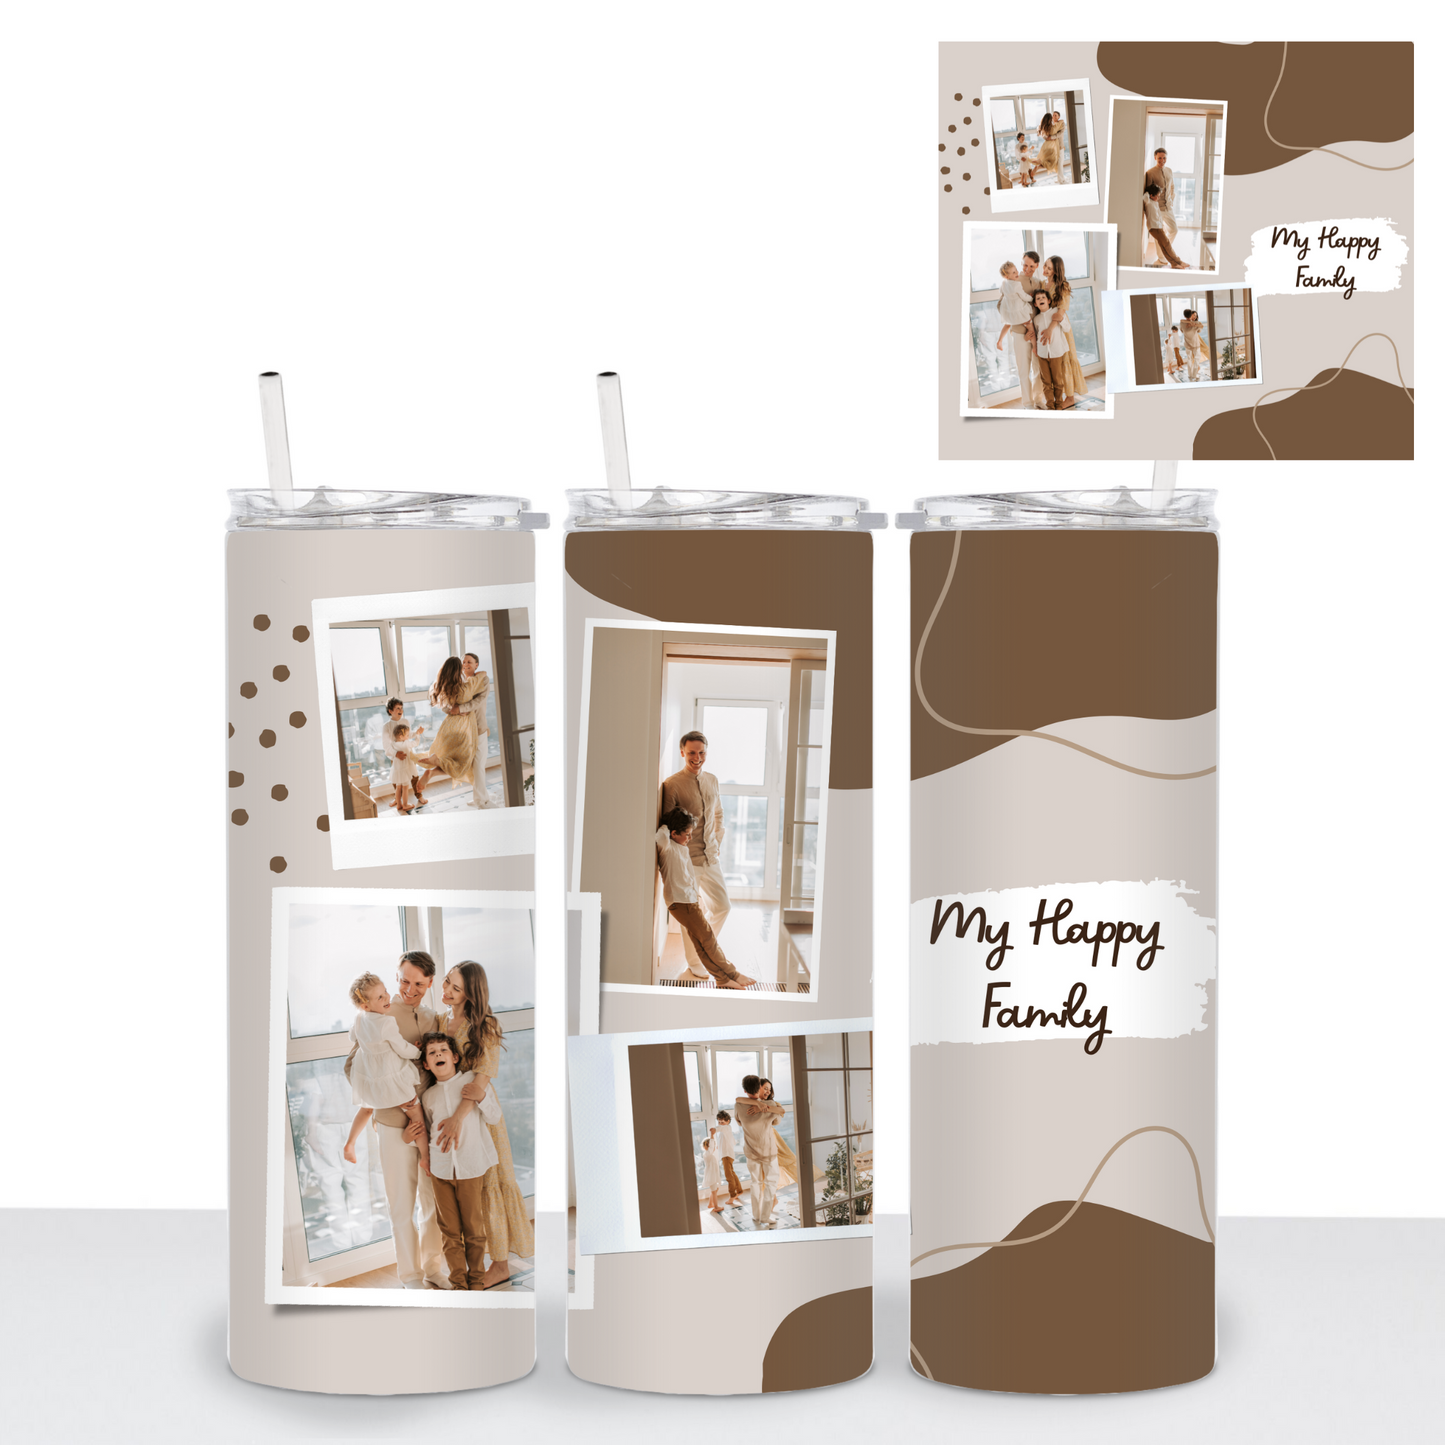 MY HAPPY FAMILY Tumbler (personalize with pictures) - 20 oz